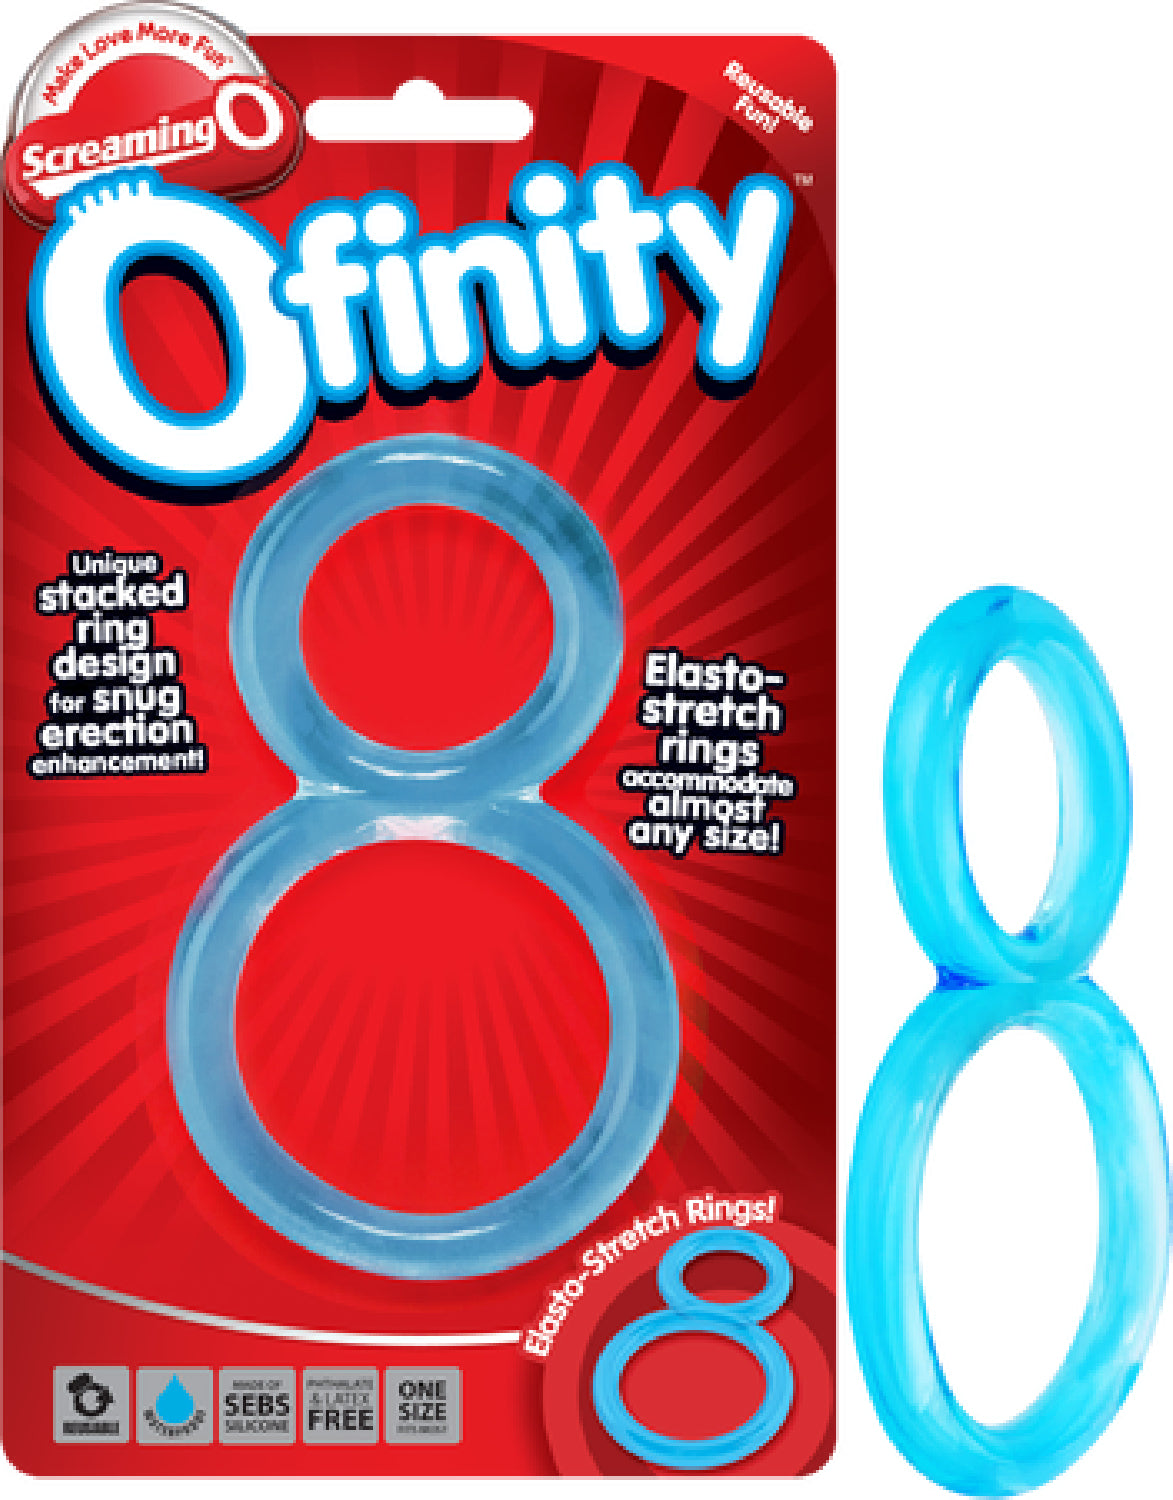 Ofinity Double Stacked Ring For Snug Erection Enhancement Blue - Club X